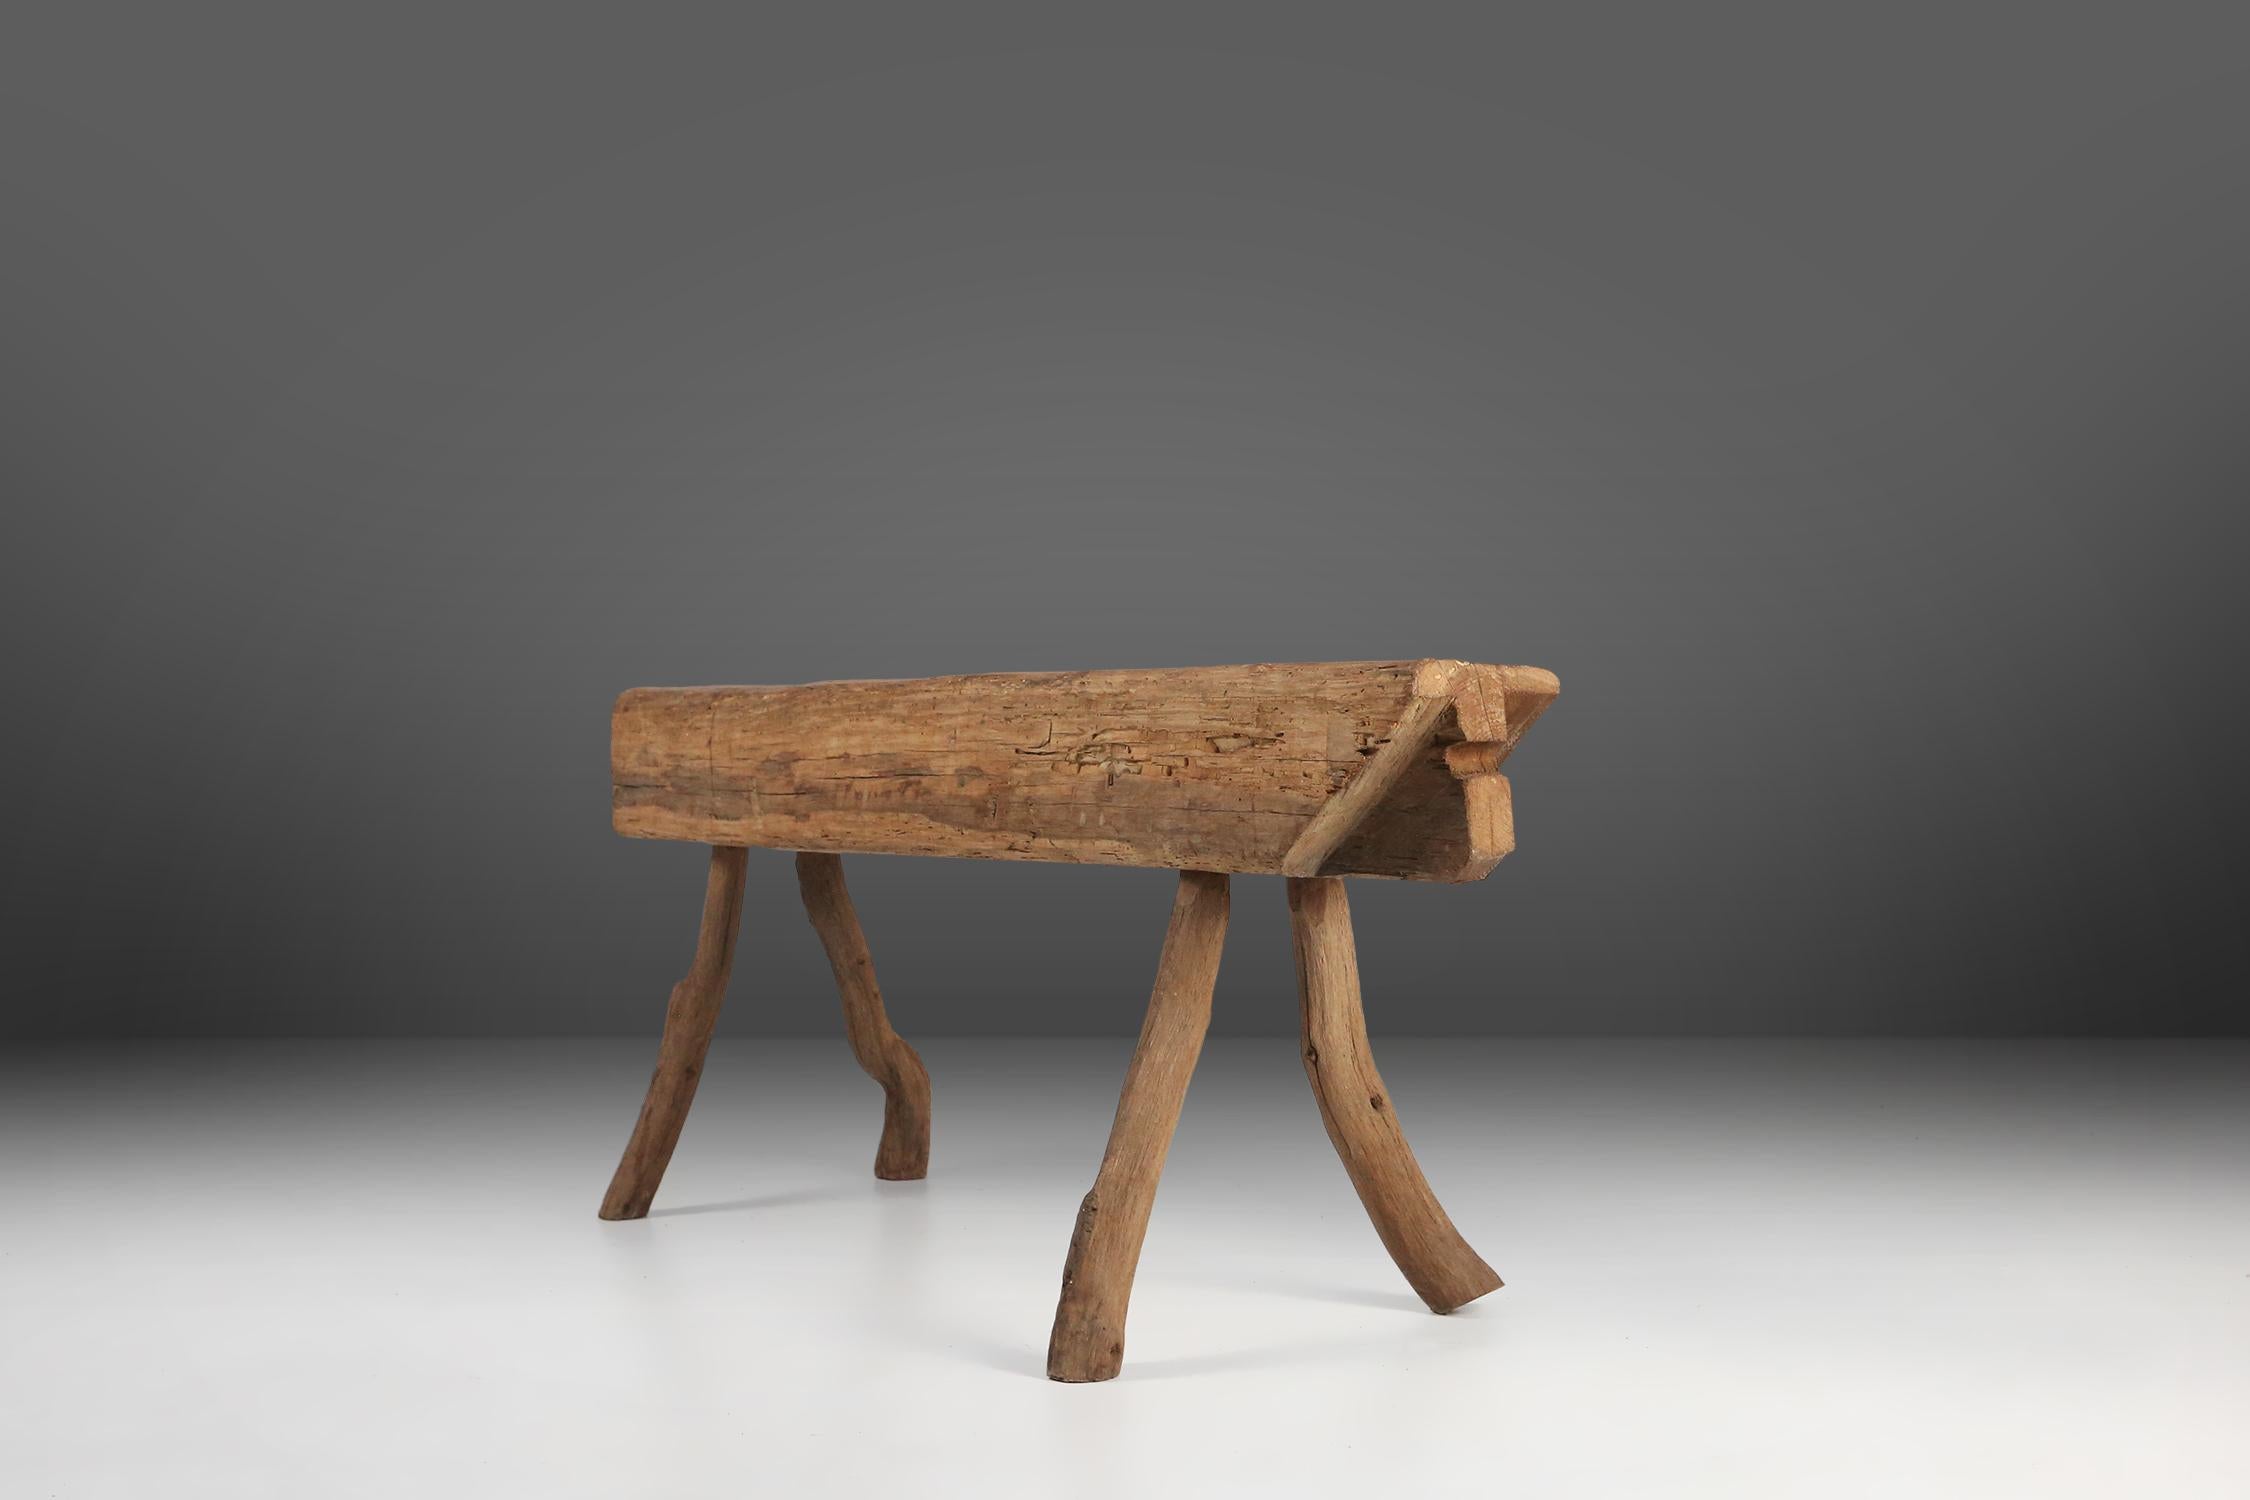 Remarkable antique wooden tree trunk bench crafted in France in 1850s. Made from a solid tree trunk, this bench is a testament to natural beauty and durability of wood.   The design of this wooden bench is both simple and captivating. Its legs are